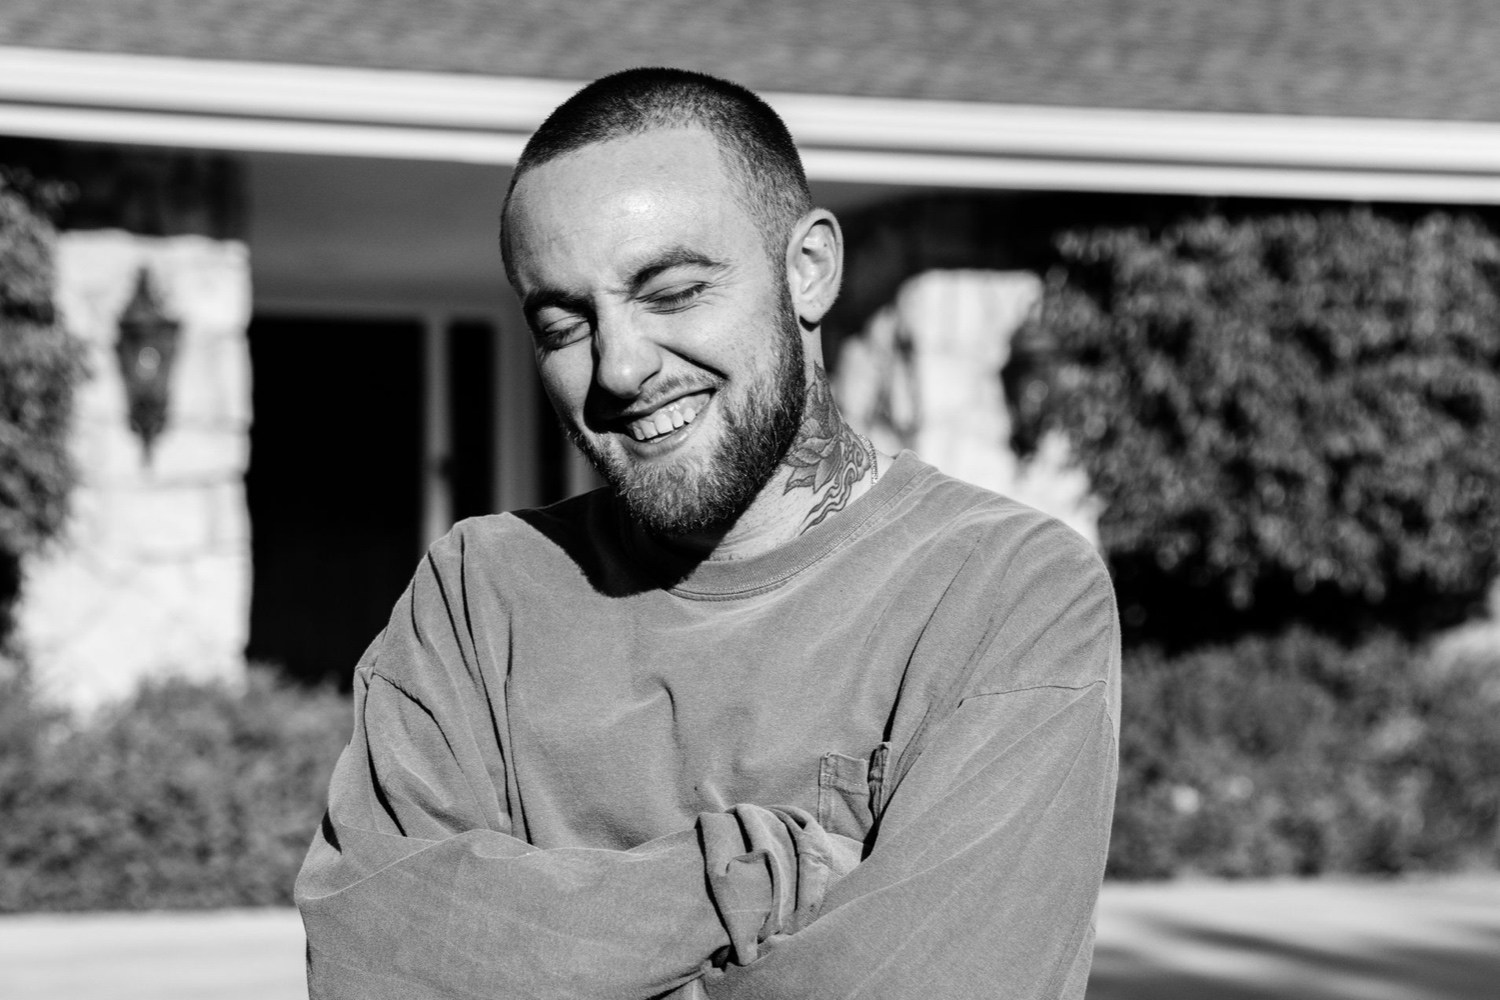 Mac Miller at home in July 2018. / Clarke Tolton for RollingStone.com